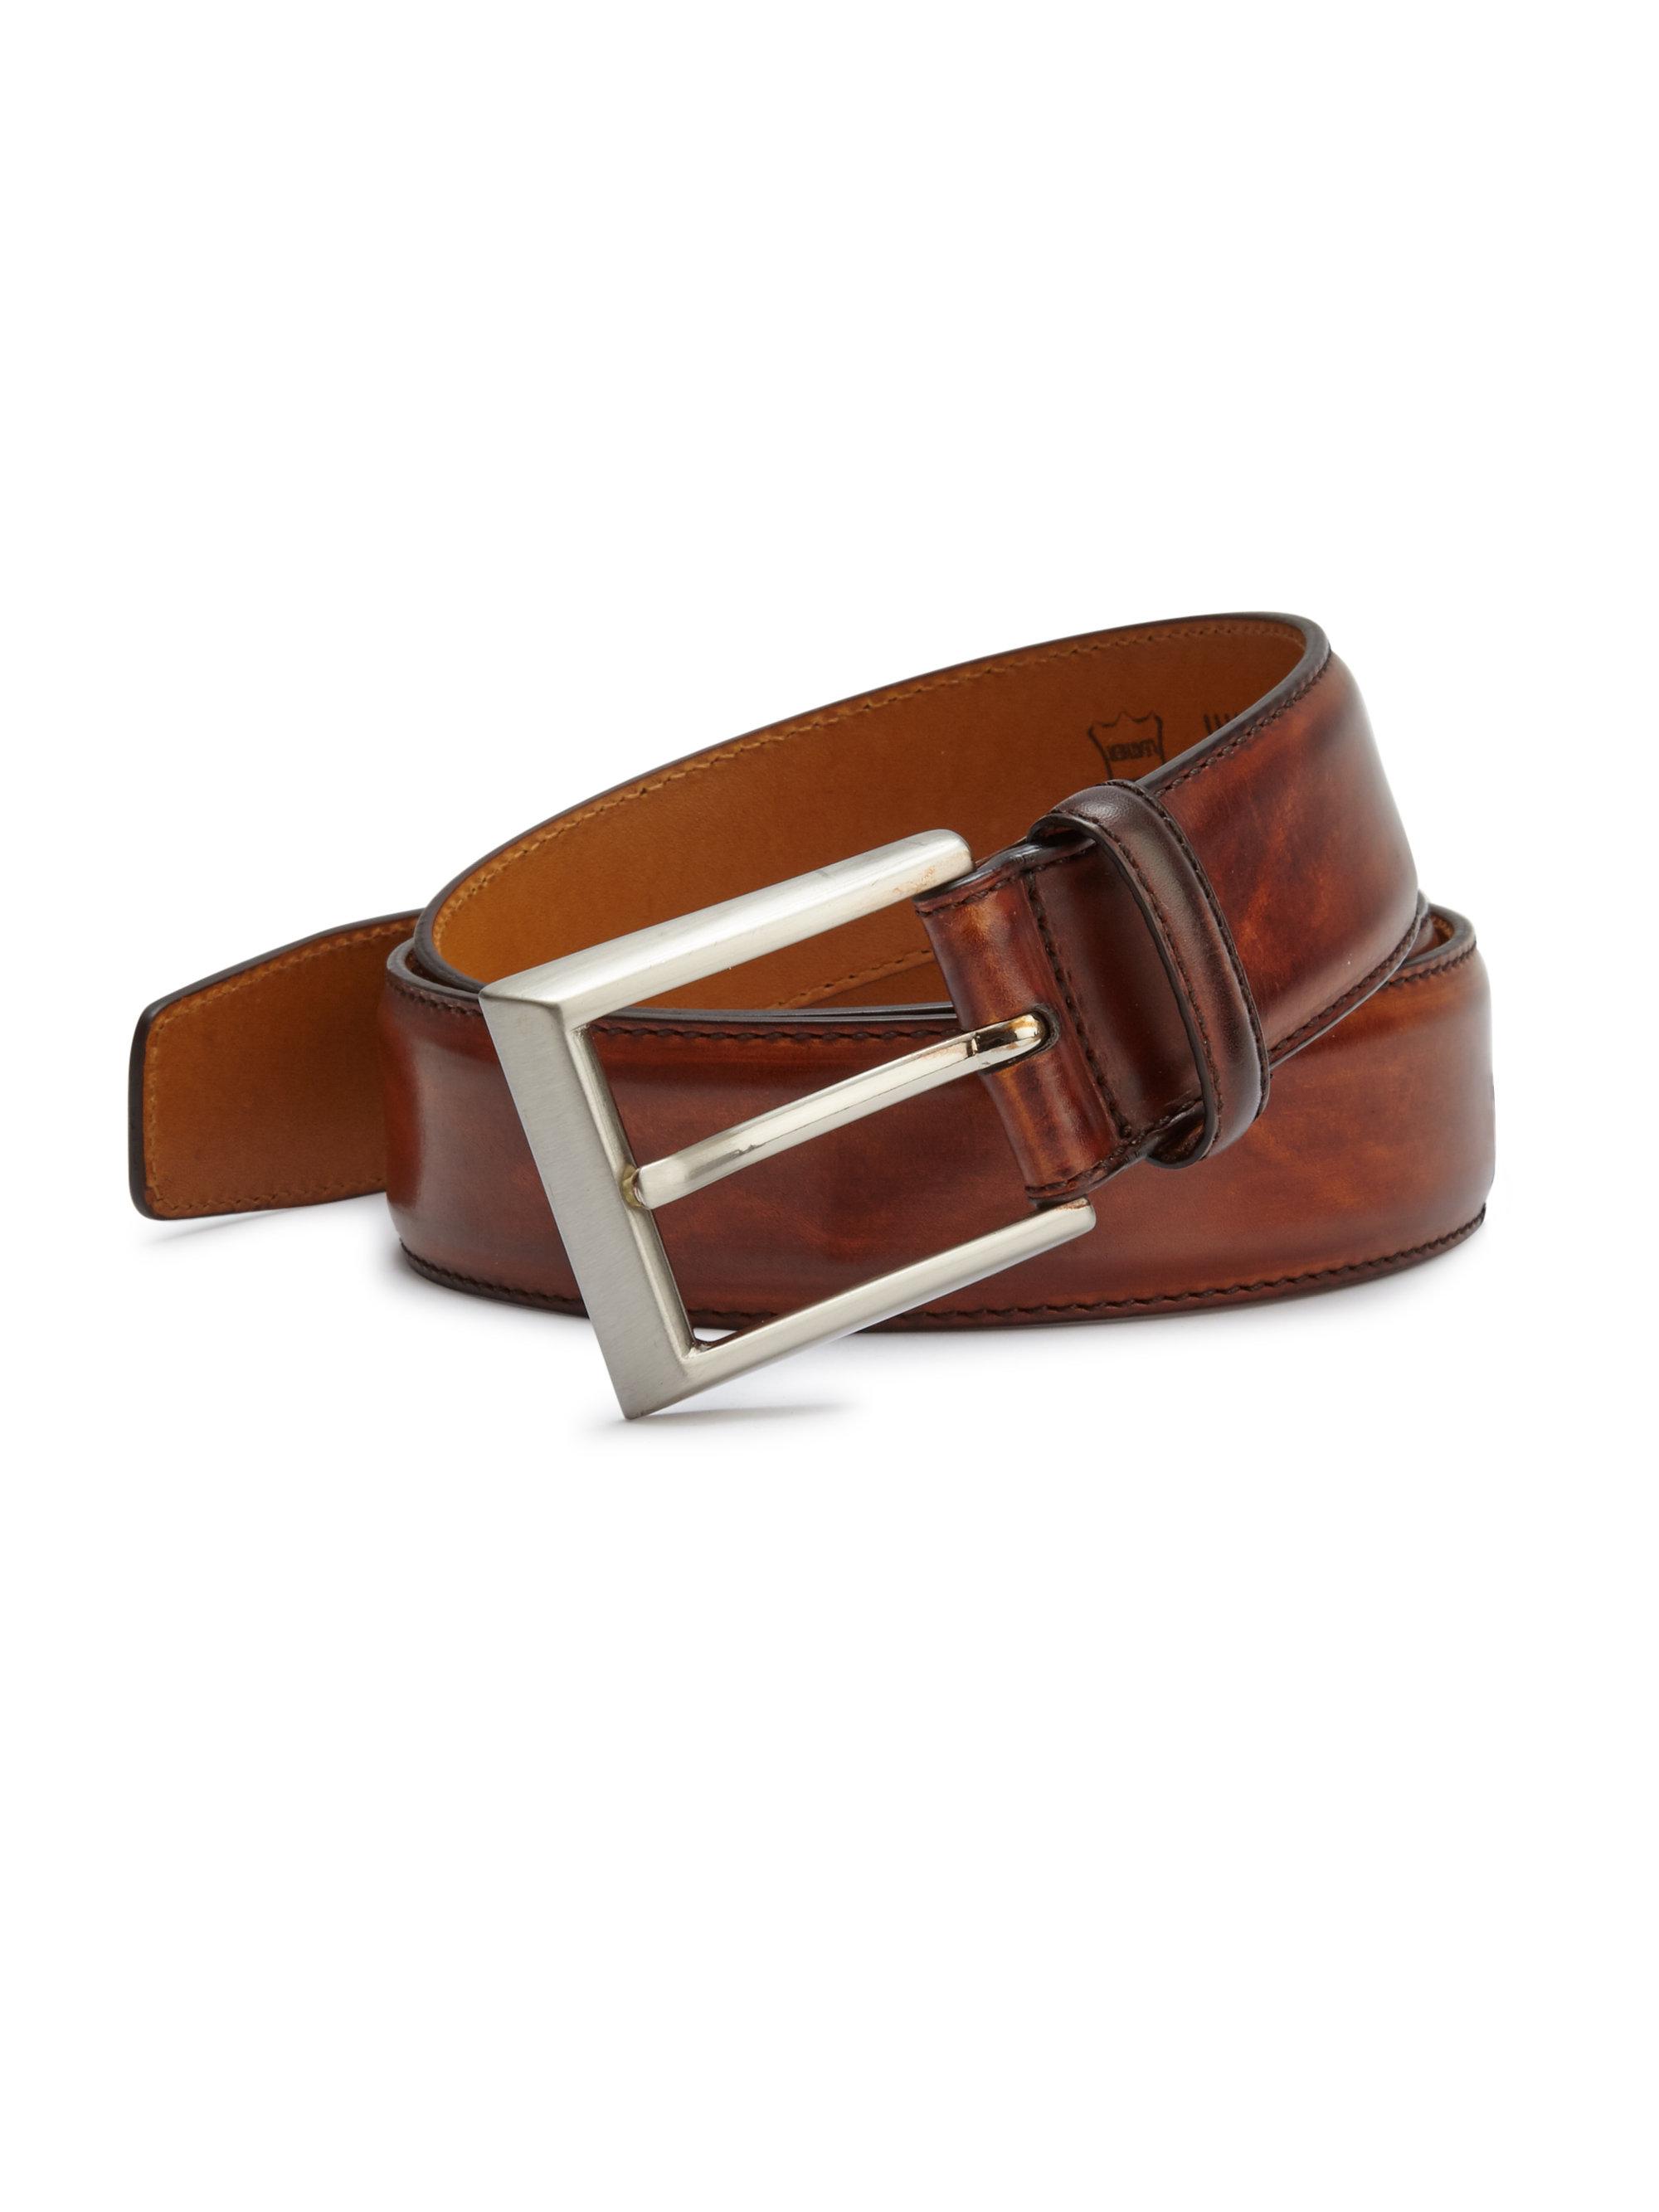 Lyst - Saks Fifth Avenue Saks Fifth Avenue By Magnanni Leather Belt in Brown for Men